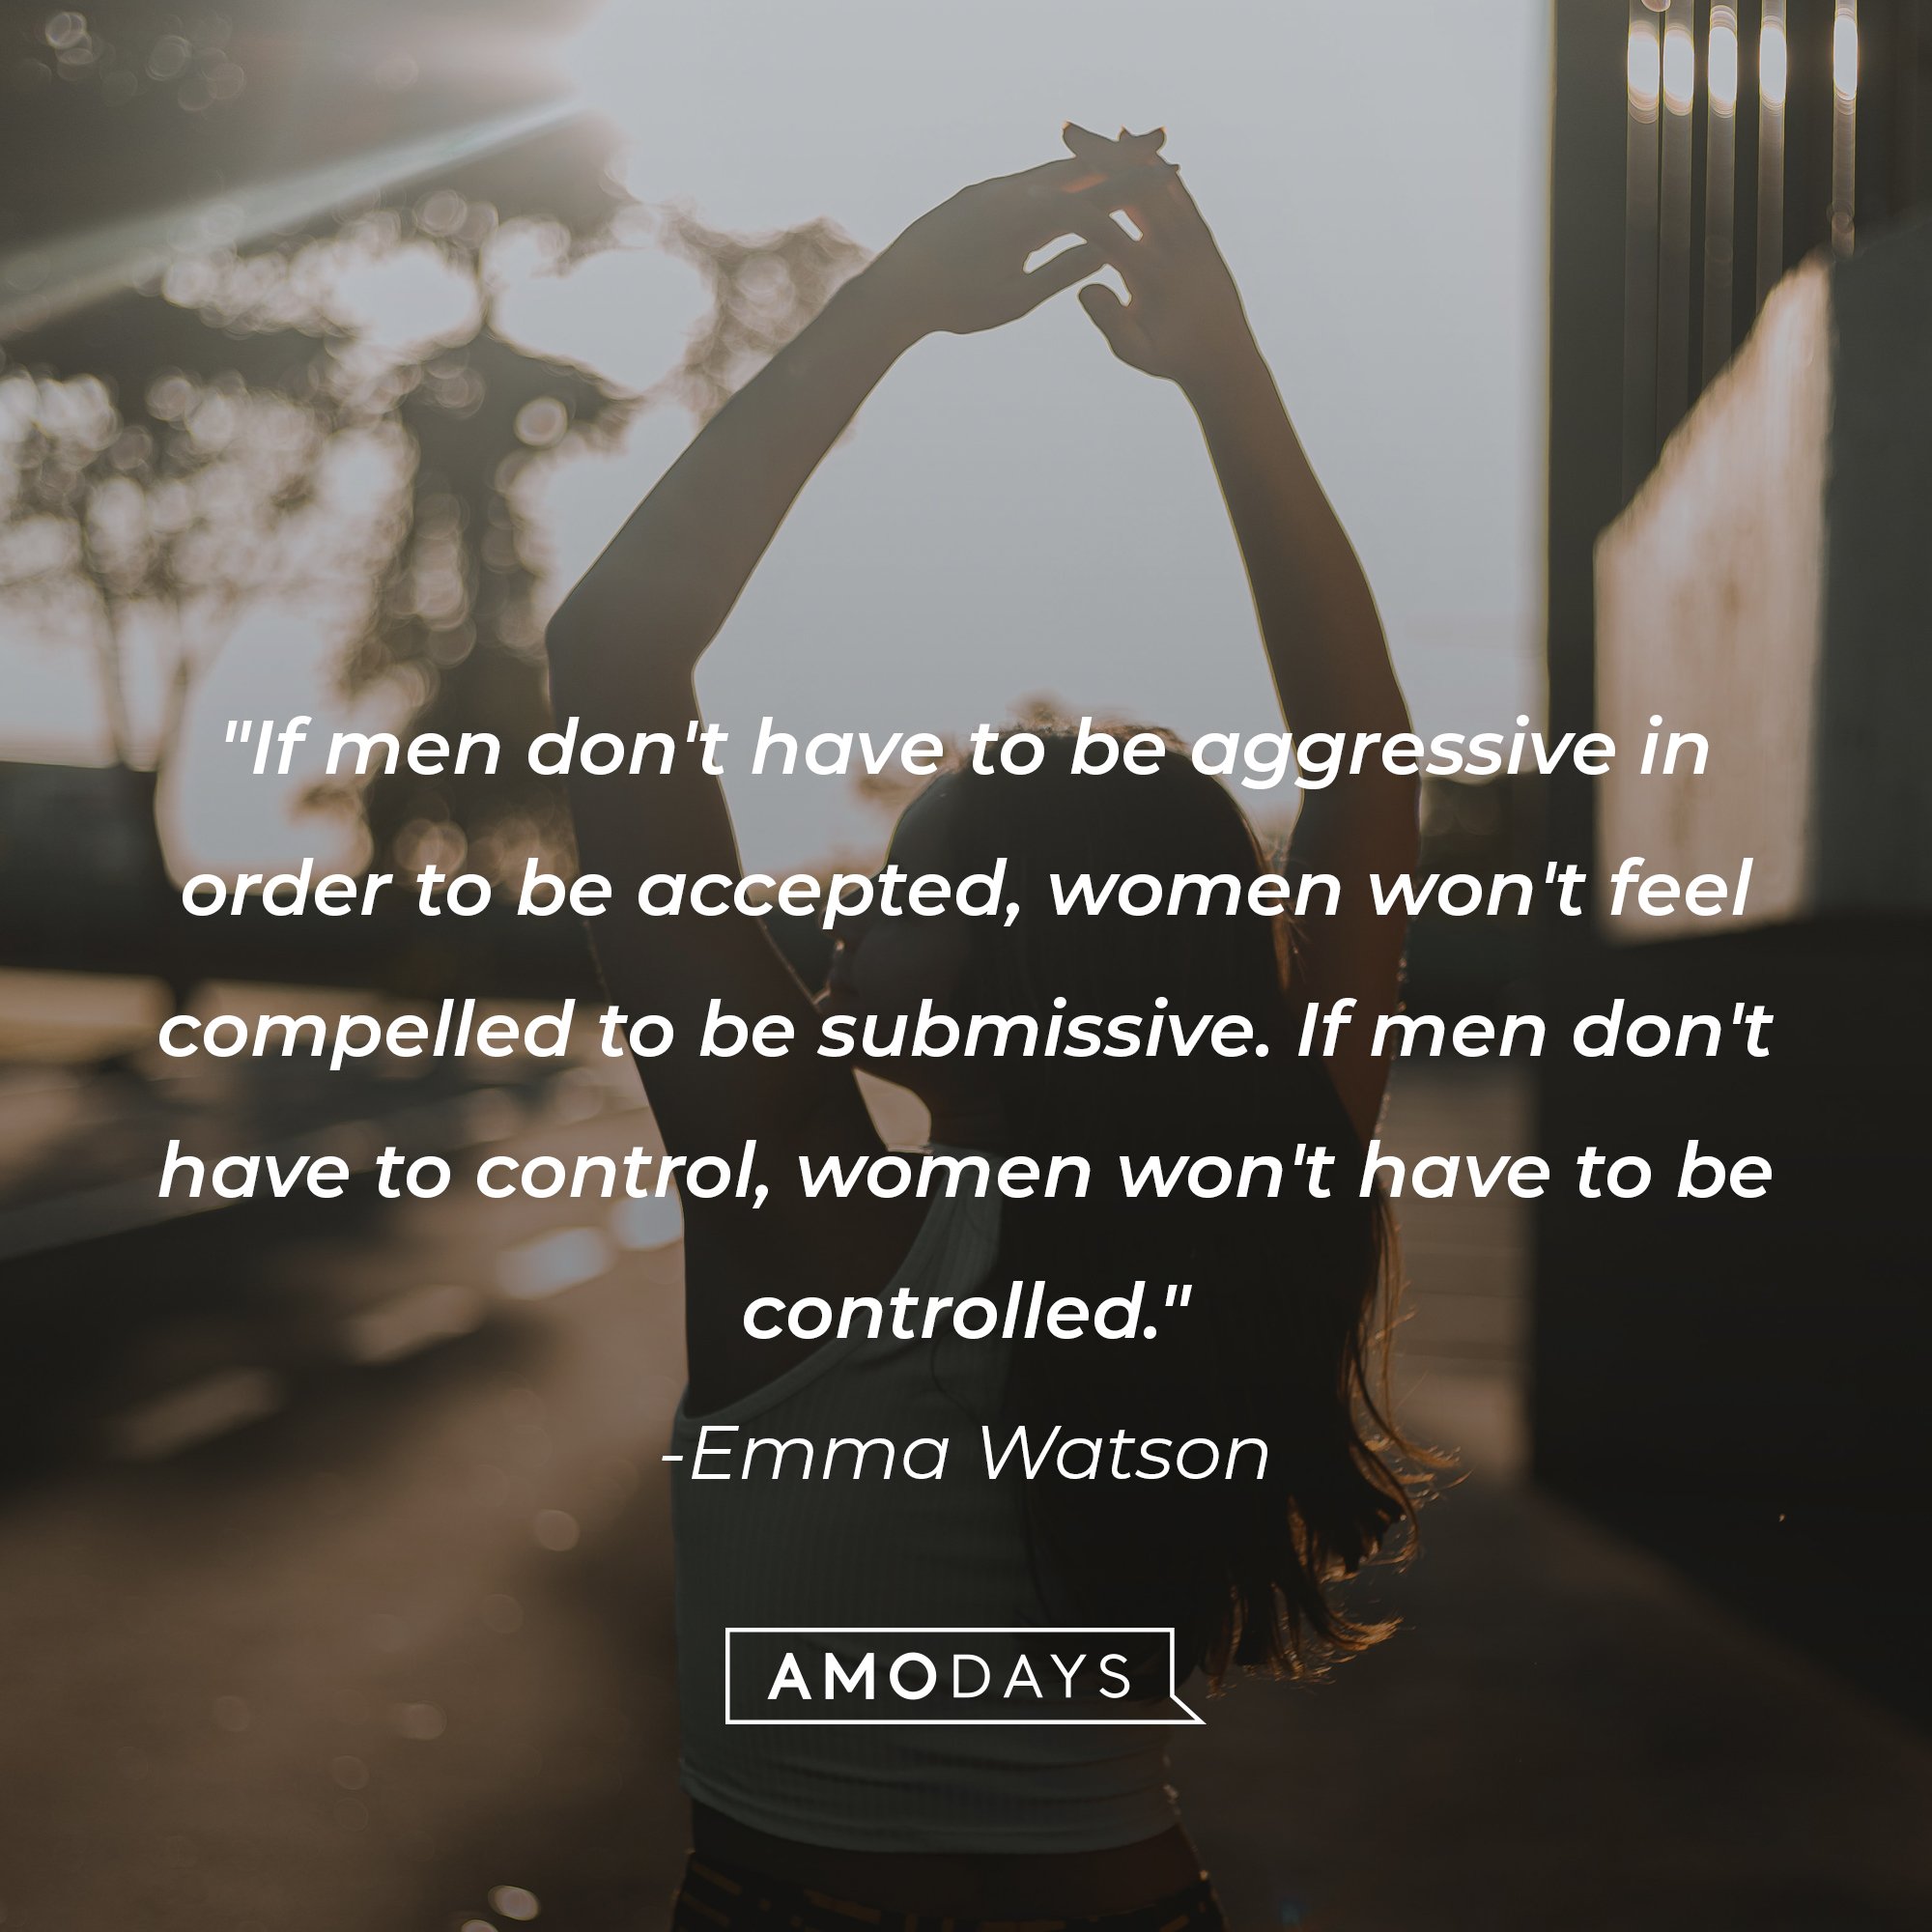  Emma Watson’s quote: "If men don't have to be aggressive in order to be accepted, women won't feel compelled to be submissive. If men don't have to control, women won't have to be controlled." | Image: AmoDays